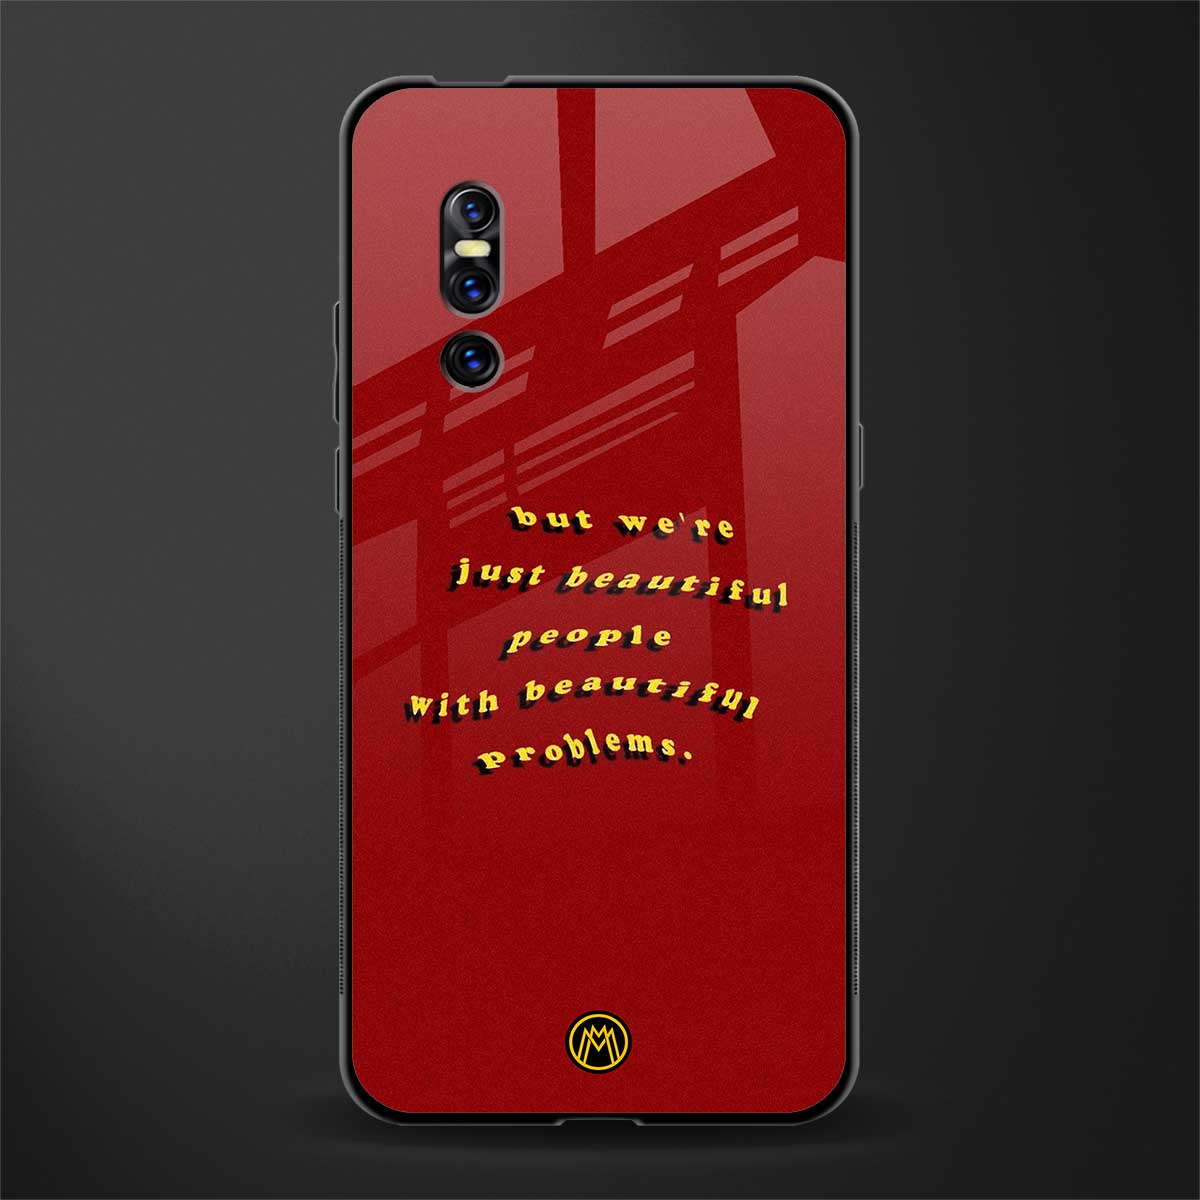 beautiful people with beautiful problems glass case for vivo v15 pro image